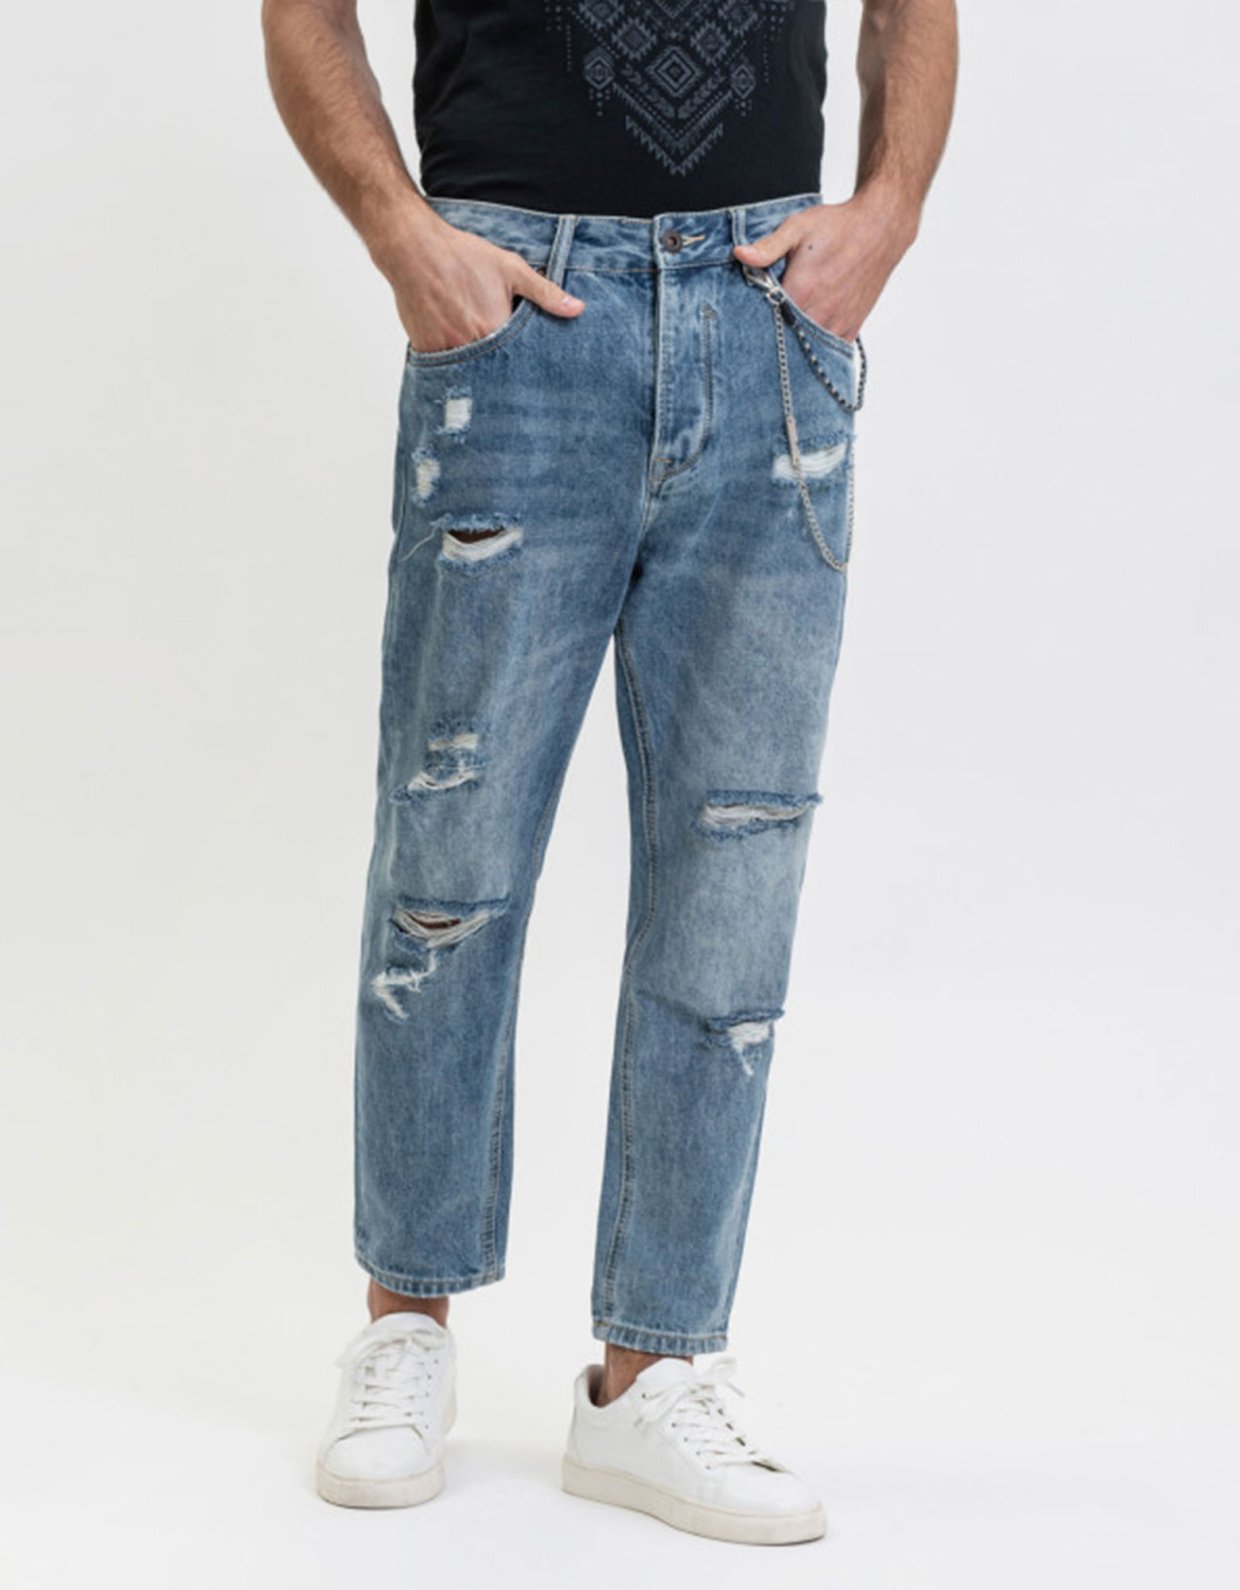 Gianni Lupo Mike carrot cropped denim pants